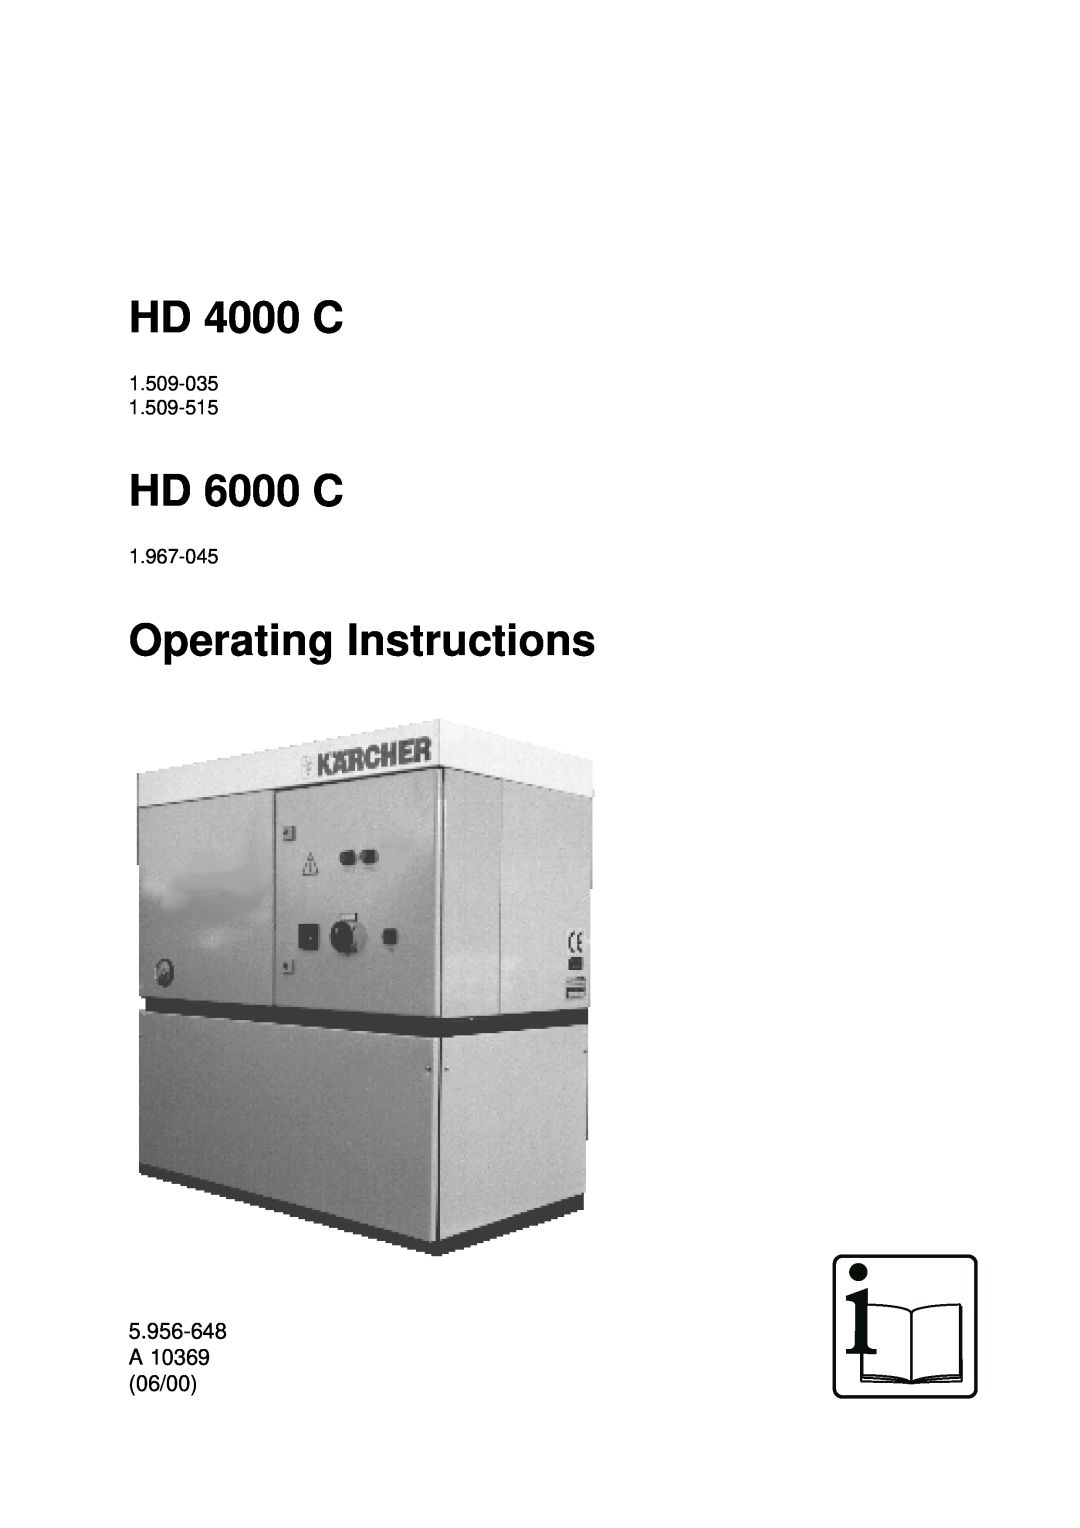 Karcher HD 6000 C operating instructions HD 4000 C, Operating Instructions, 5.956-648 A10369 06/00 